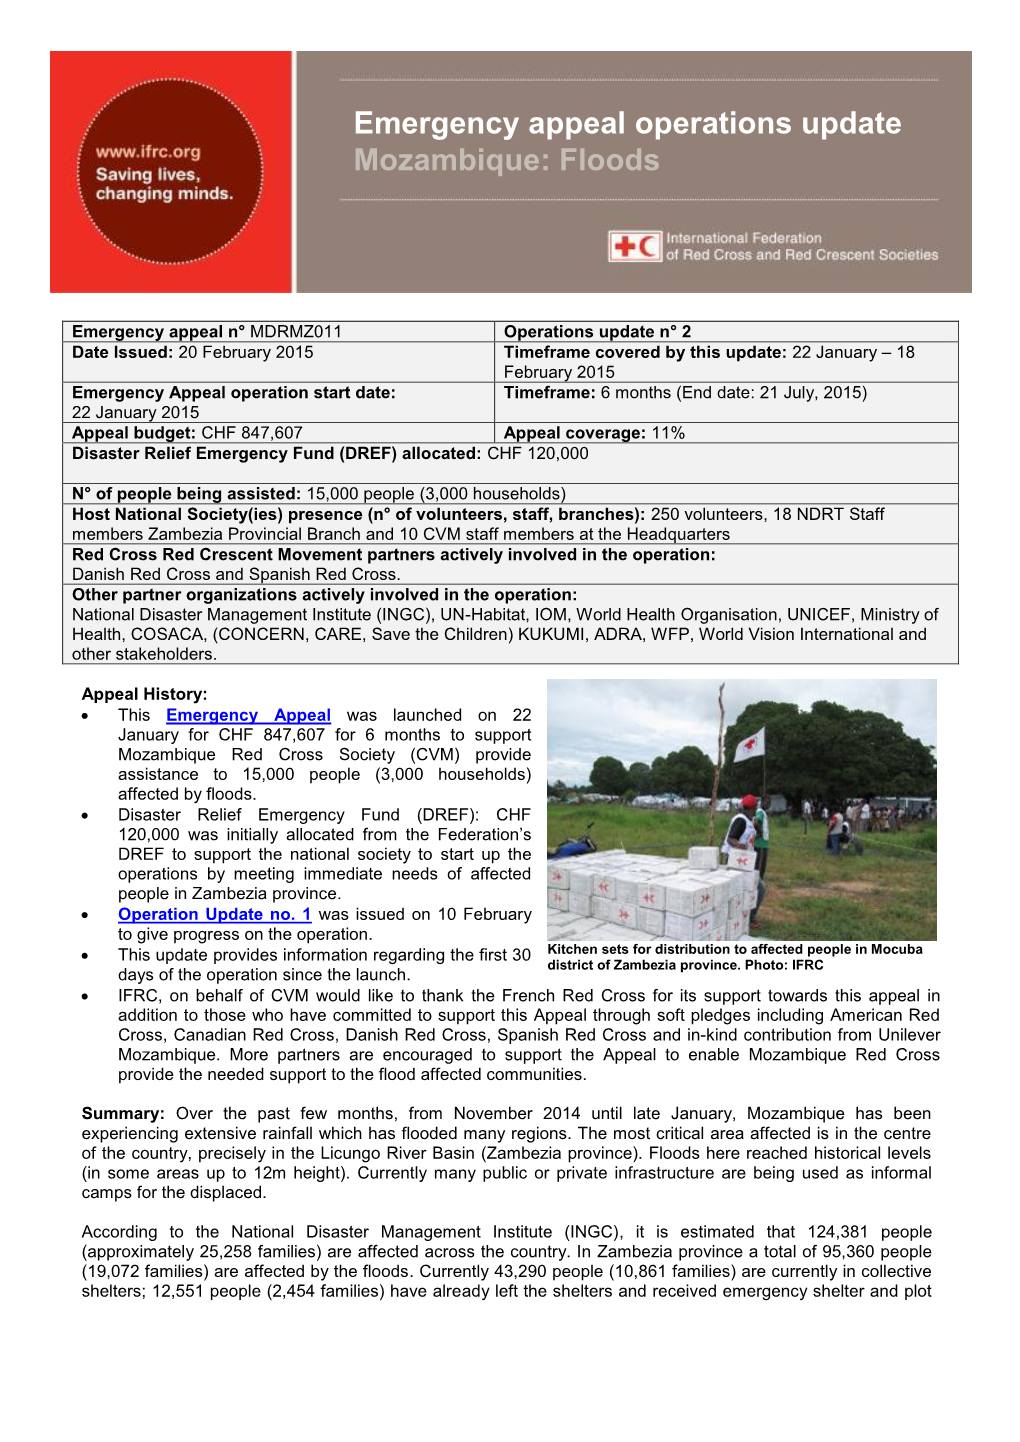 Emergency Appeal Operations Update Mozambique: Floods